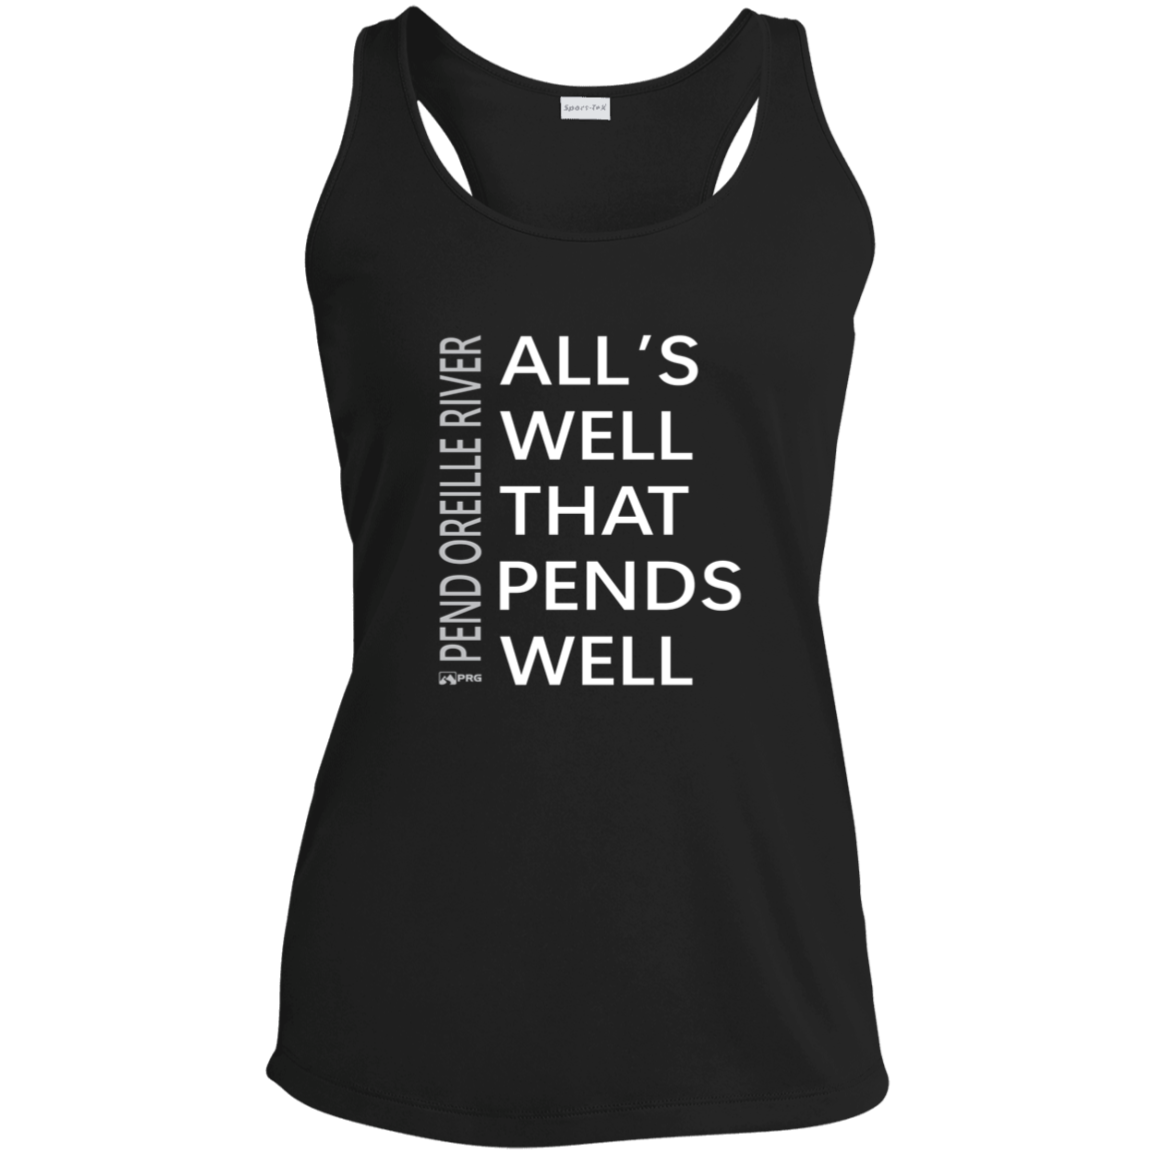 All's Well - Womens Racerback